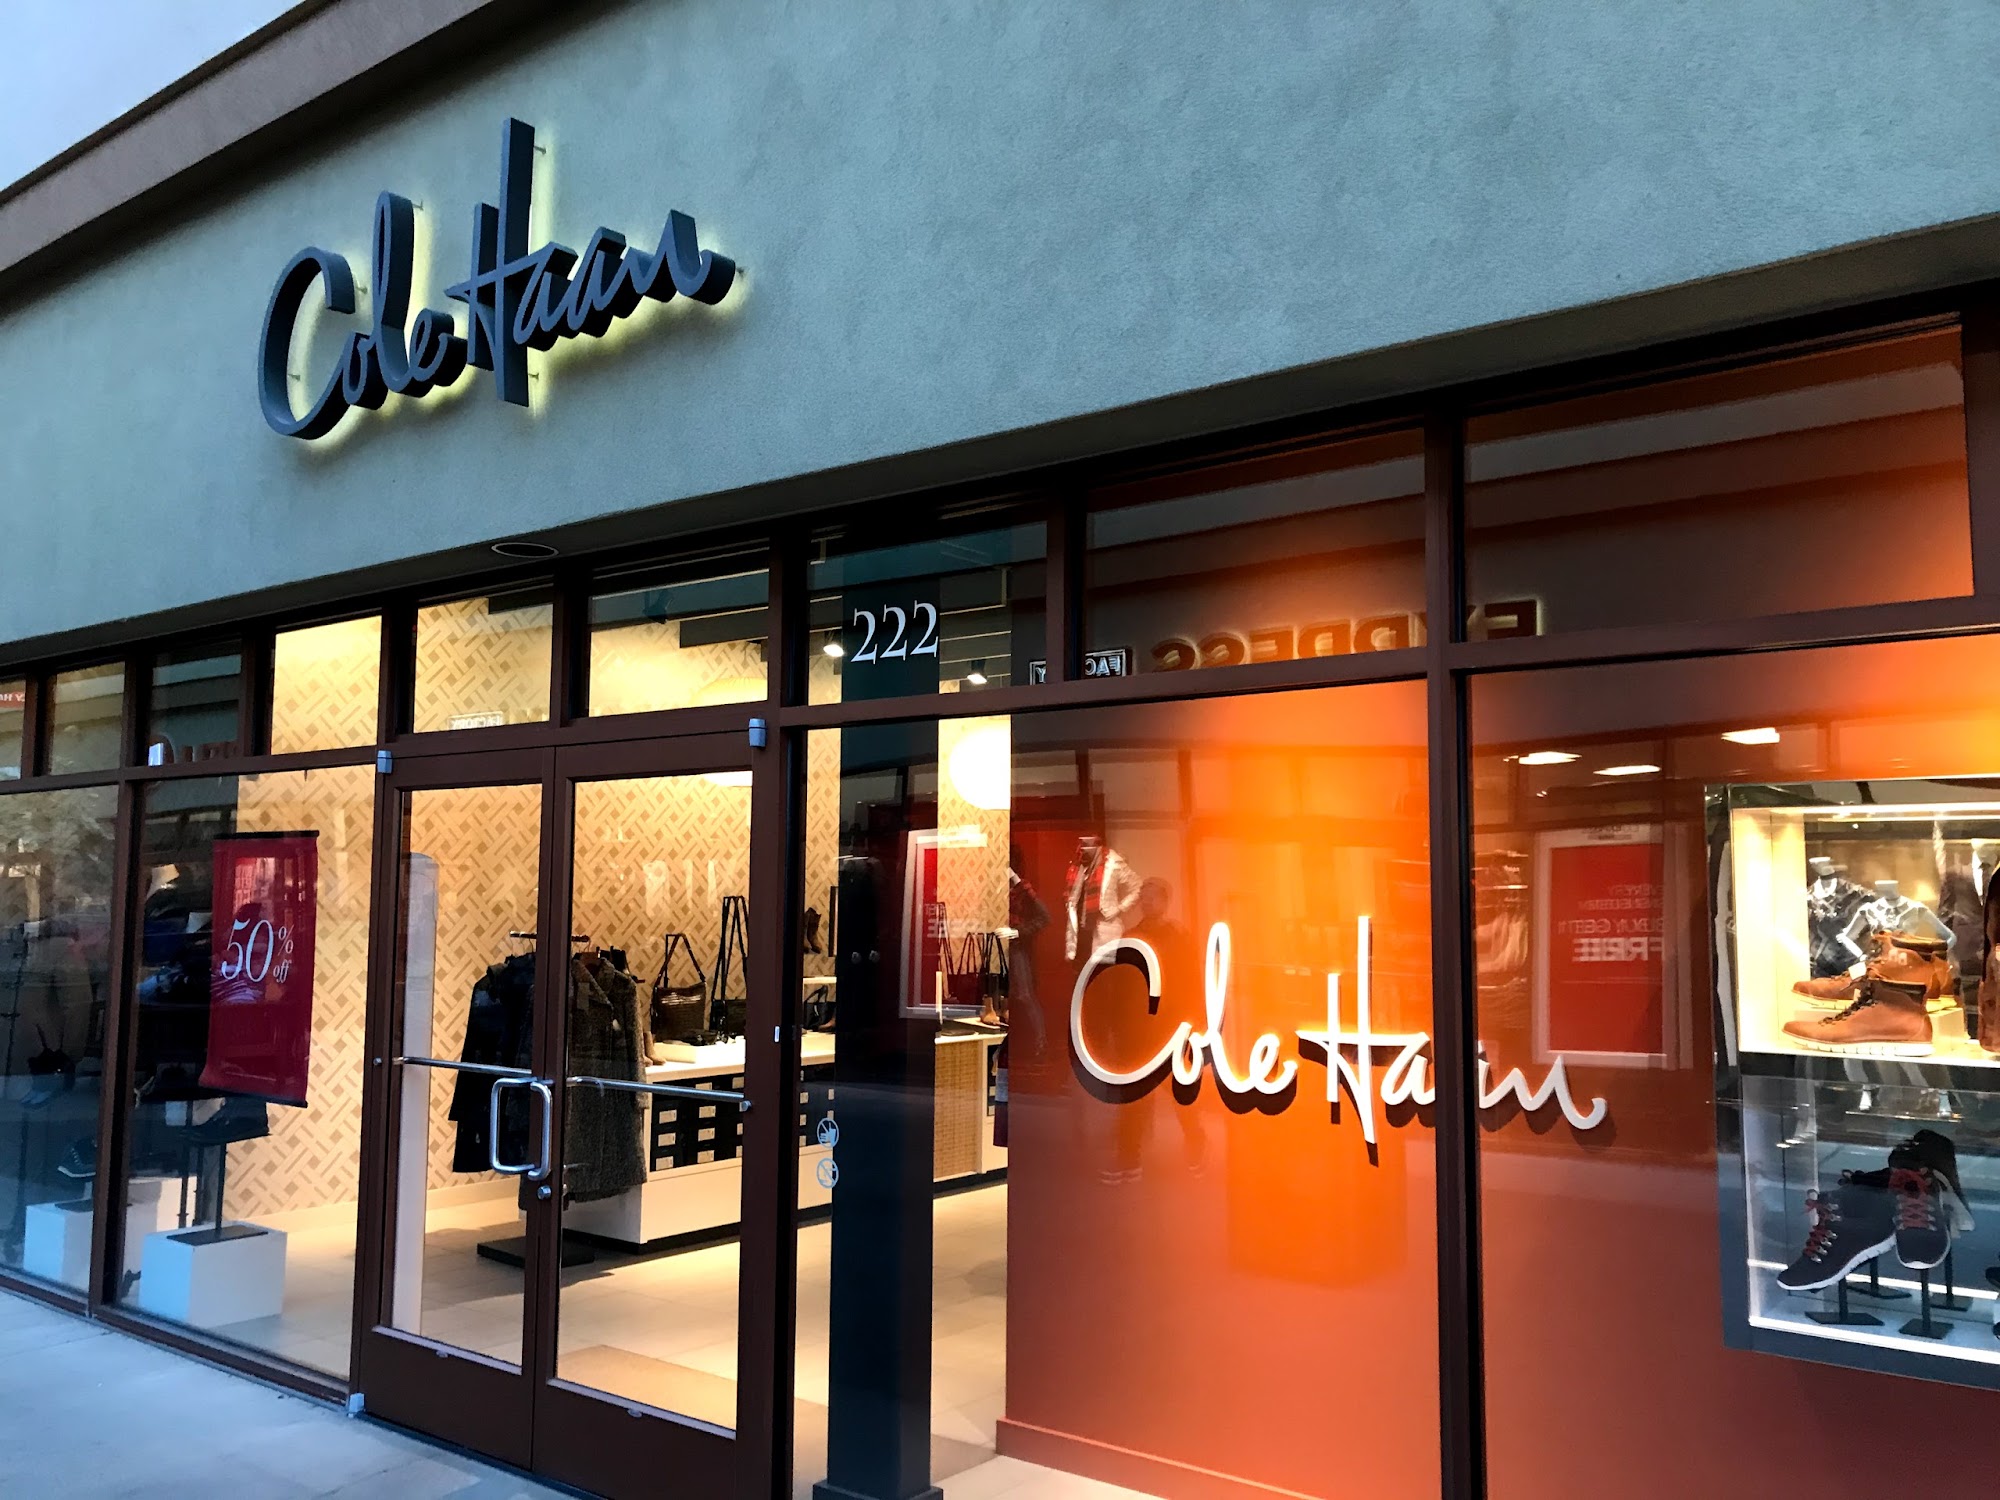 Cole Haan Outlet